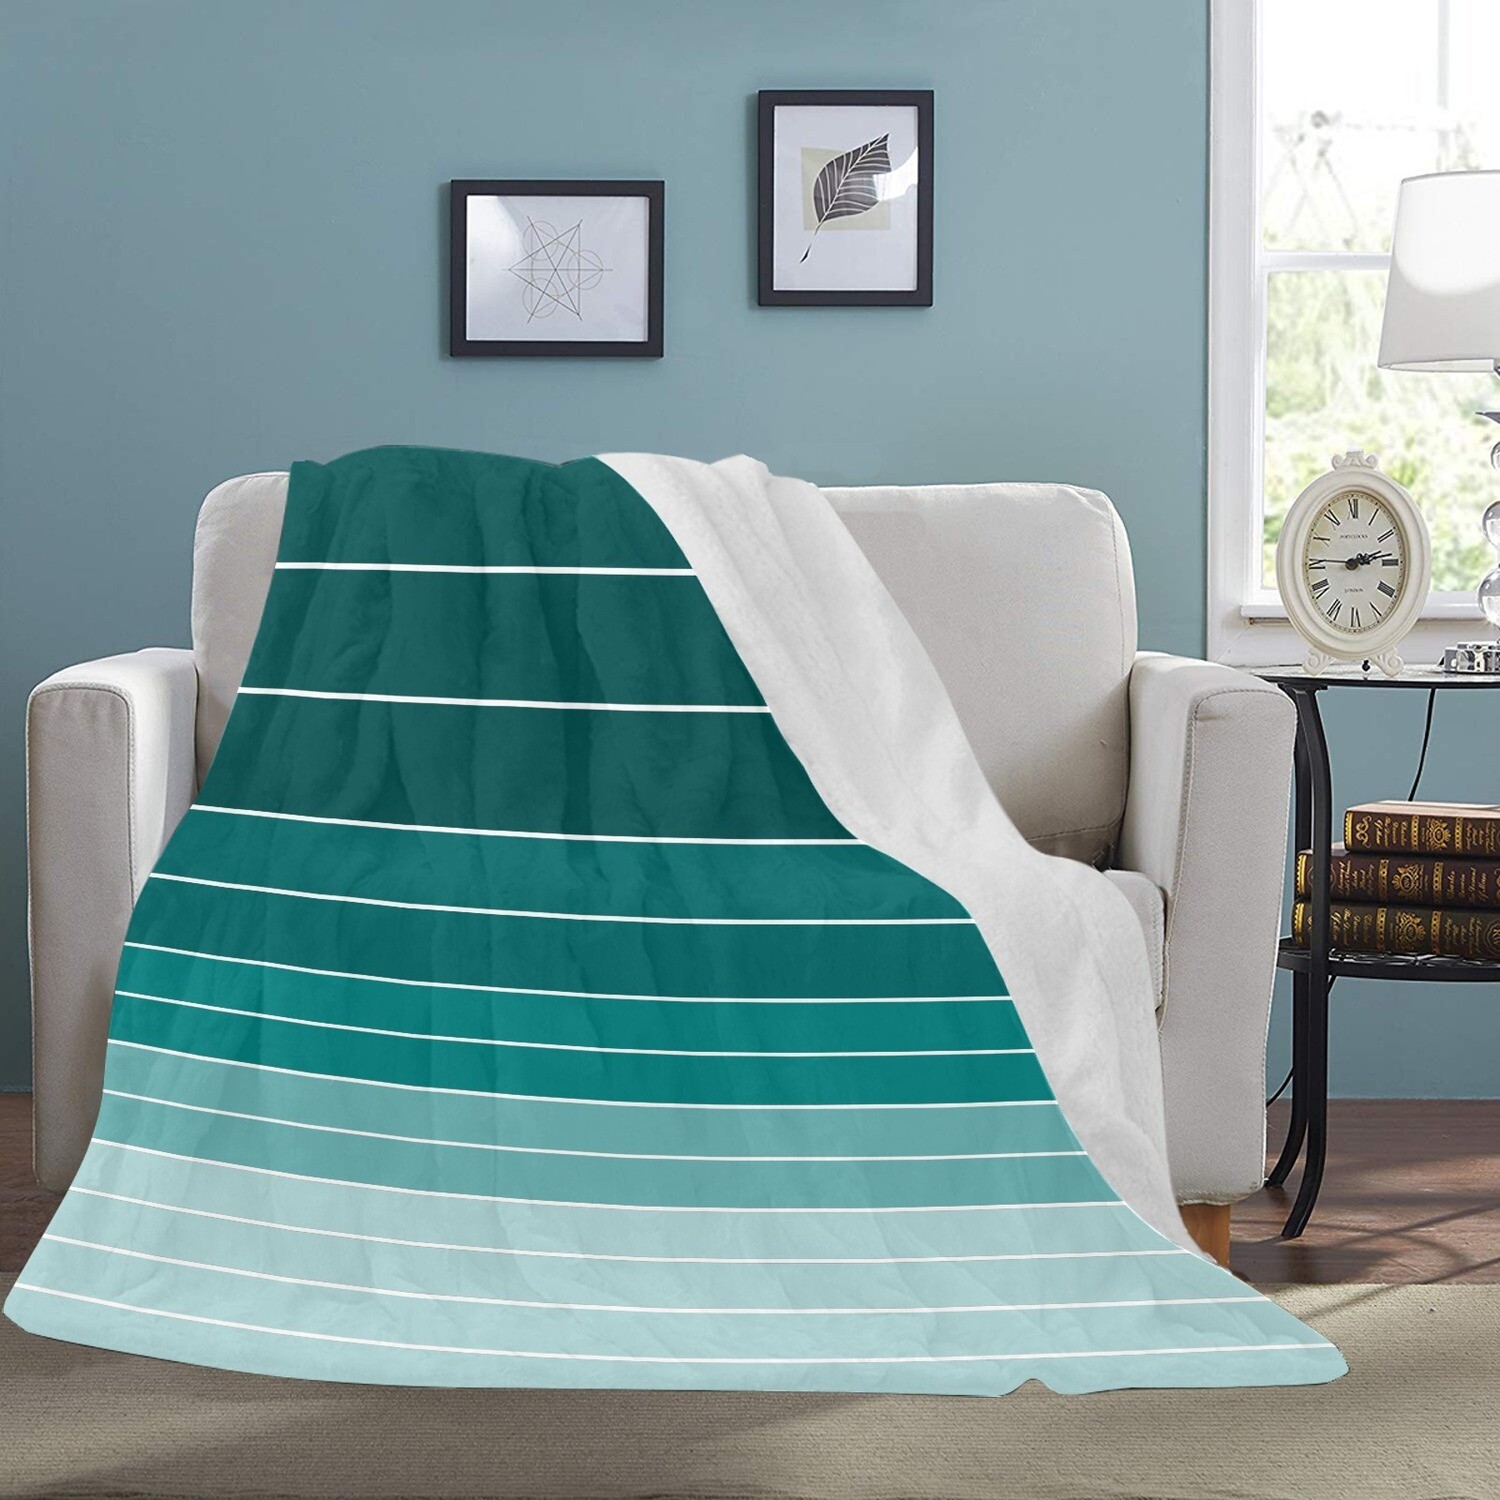 🤴🏽👸🏽Large Ultra-Soft Micro Fleece Blanket Shades of teal stripes, gift, gift for her, gift for him, gift for them, 70"x80"